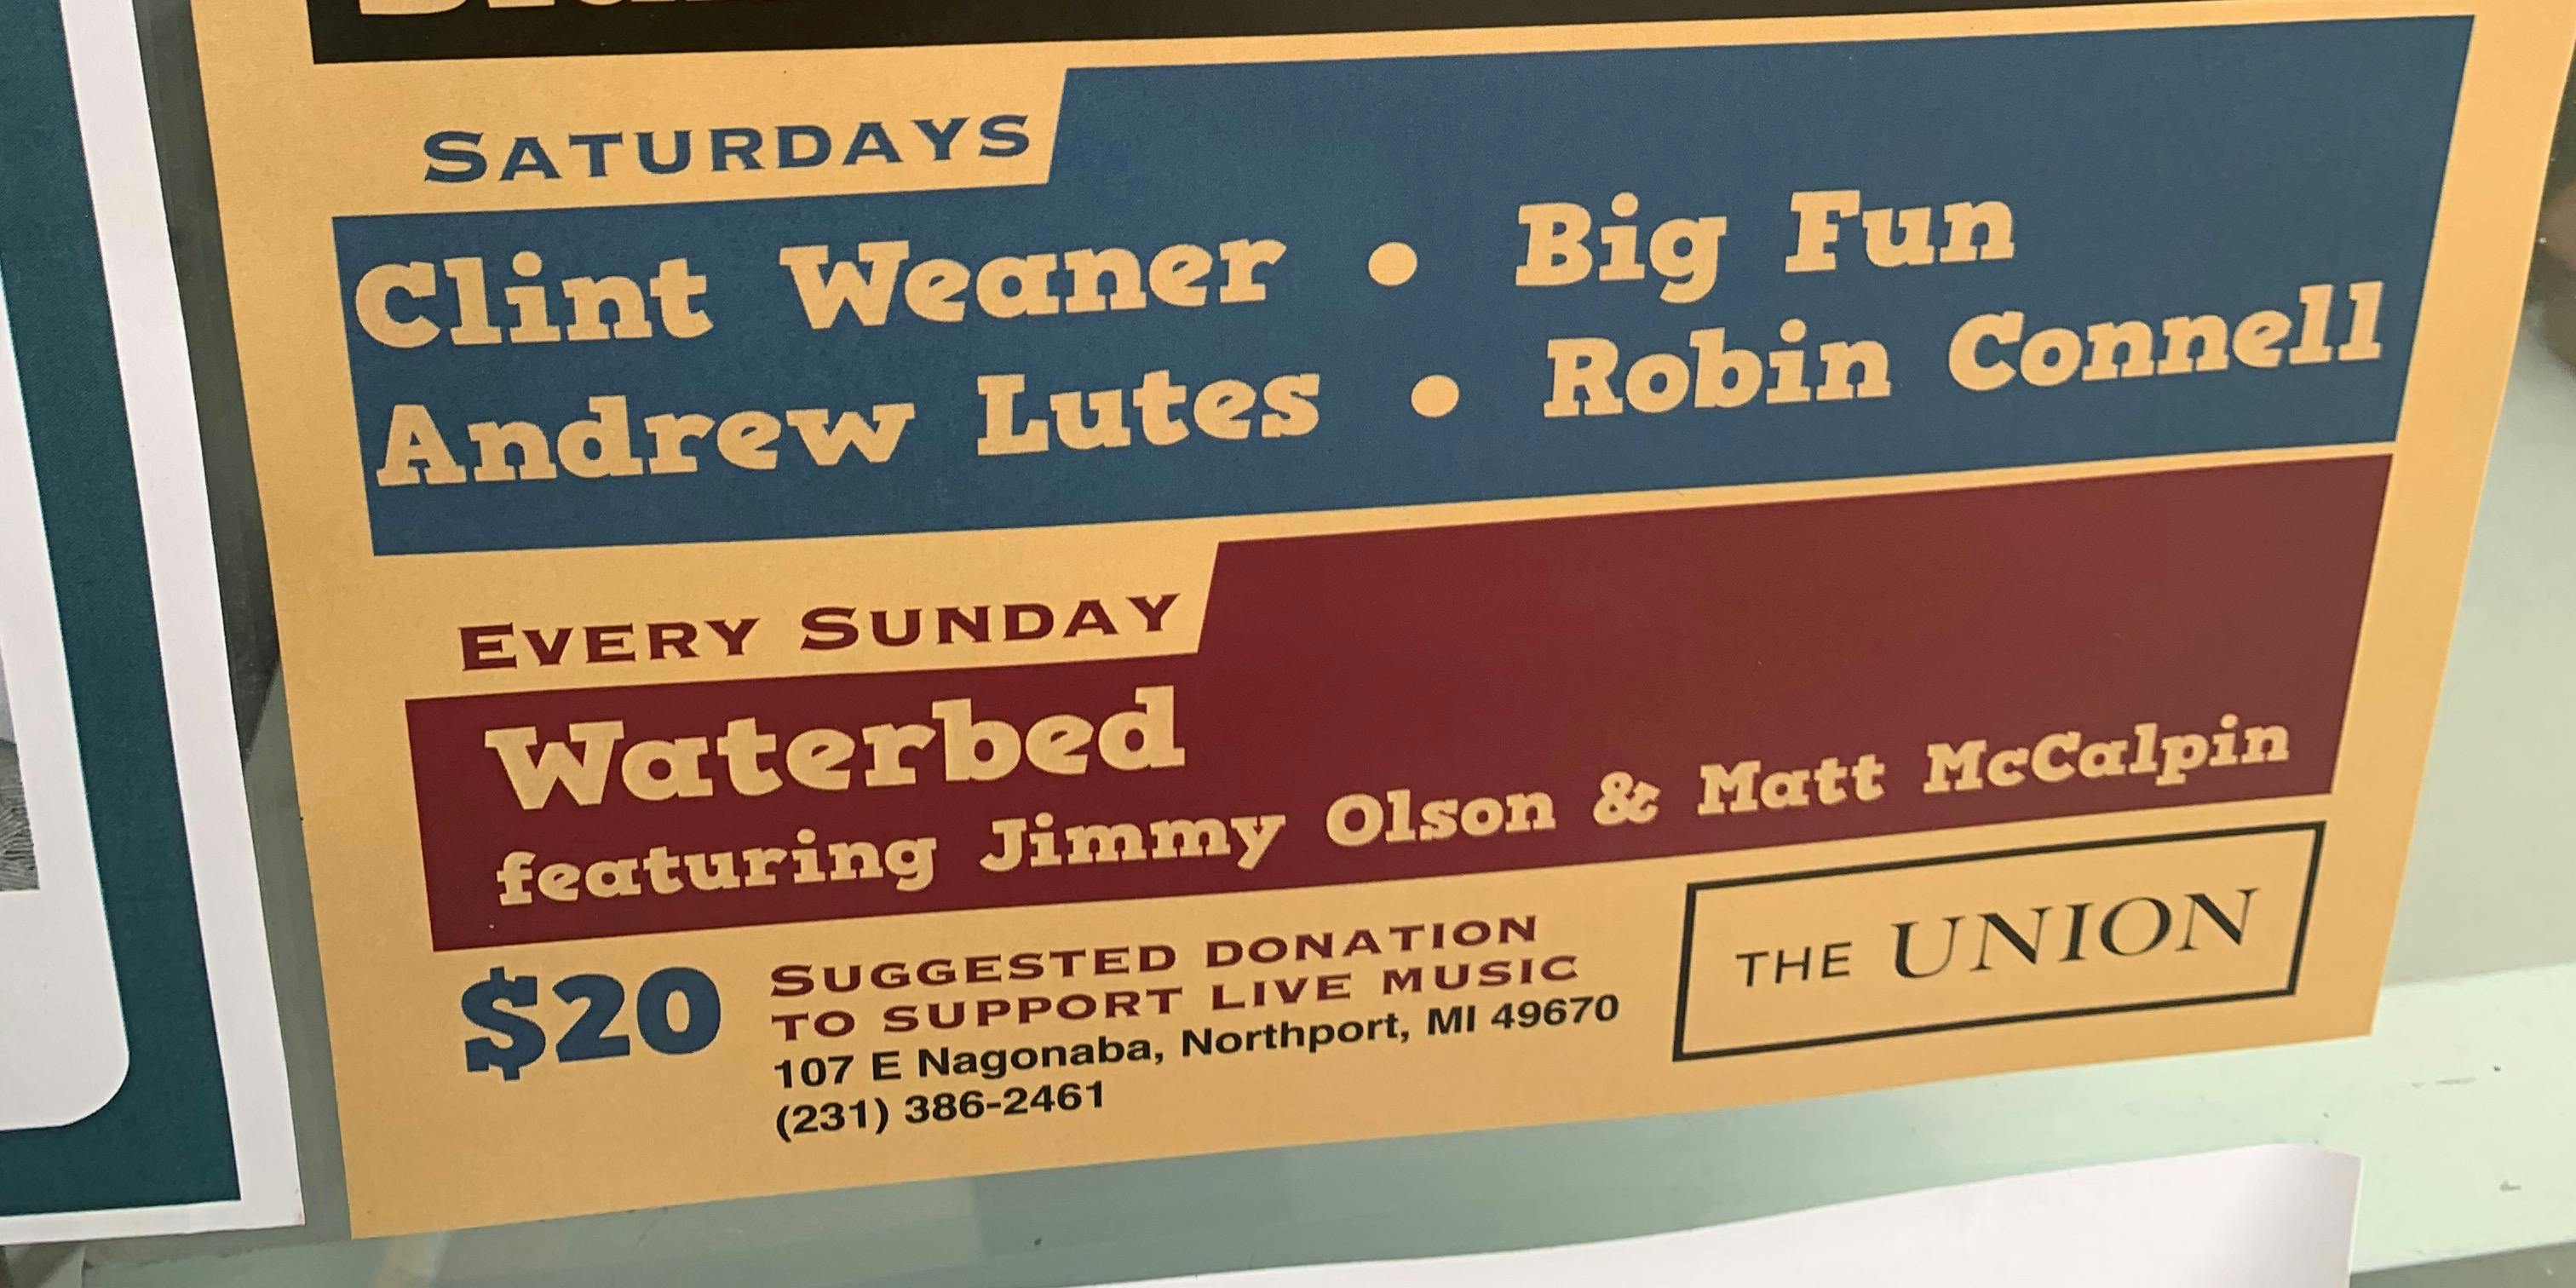 Clint Weaner + Big Fun + Andrew Lutes + Robin Connell